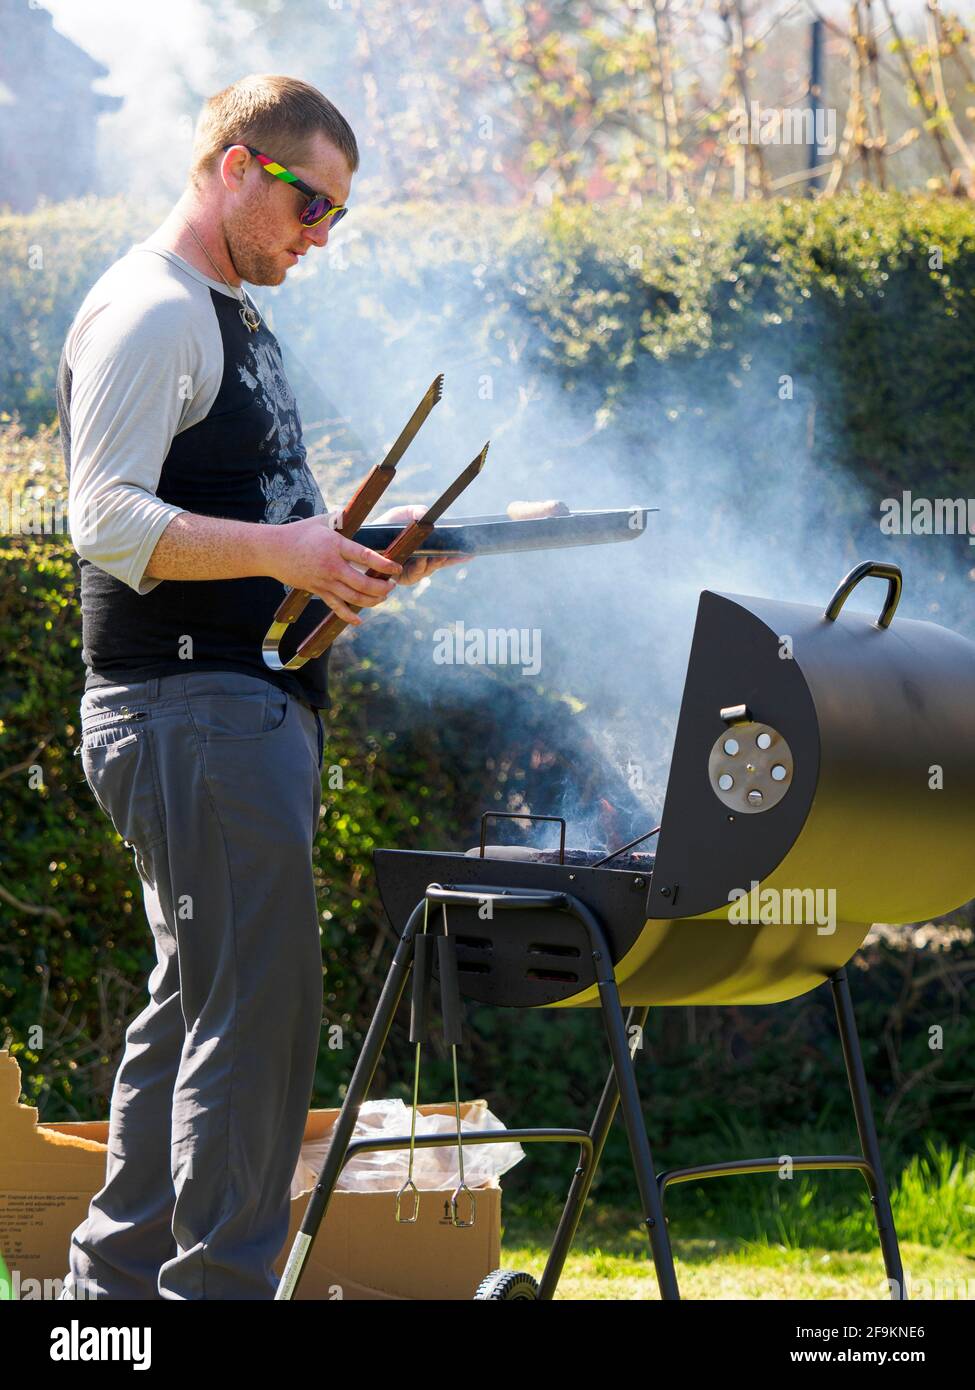 Man cooking on a barbeque, Cornwall, UK Stock Photo